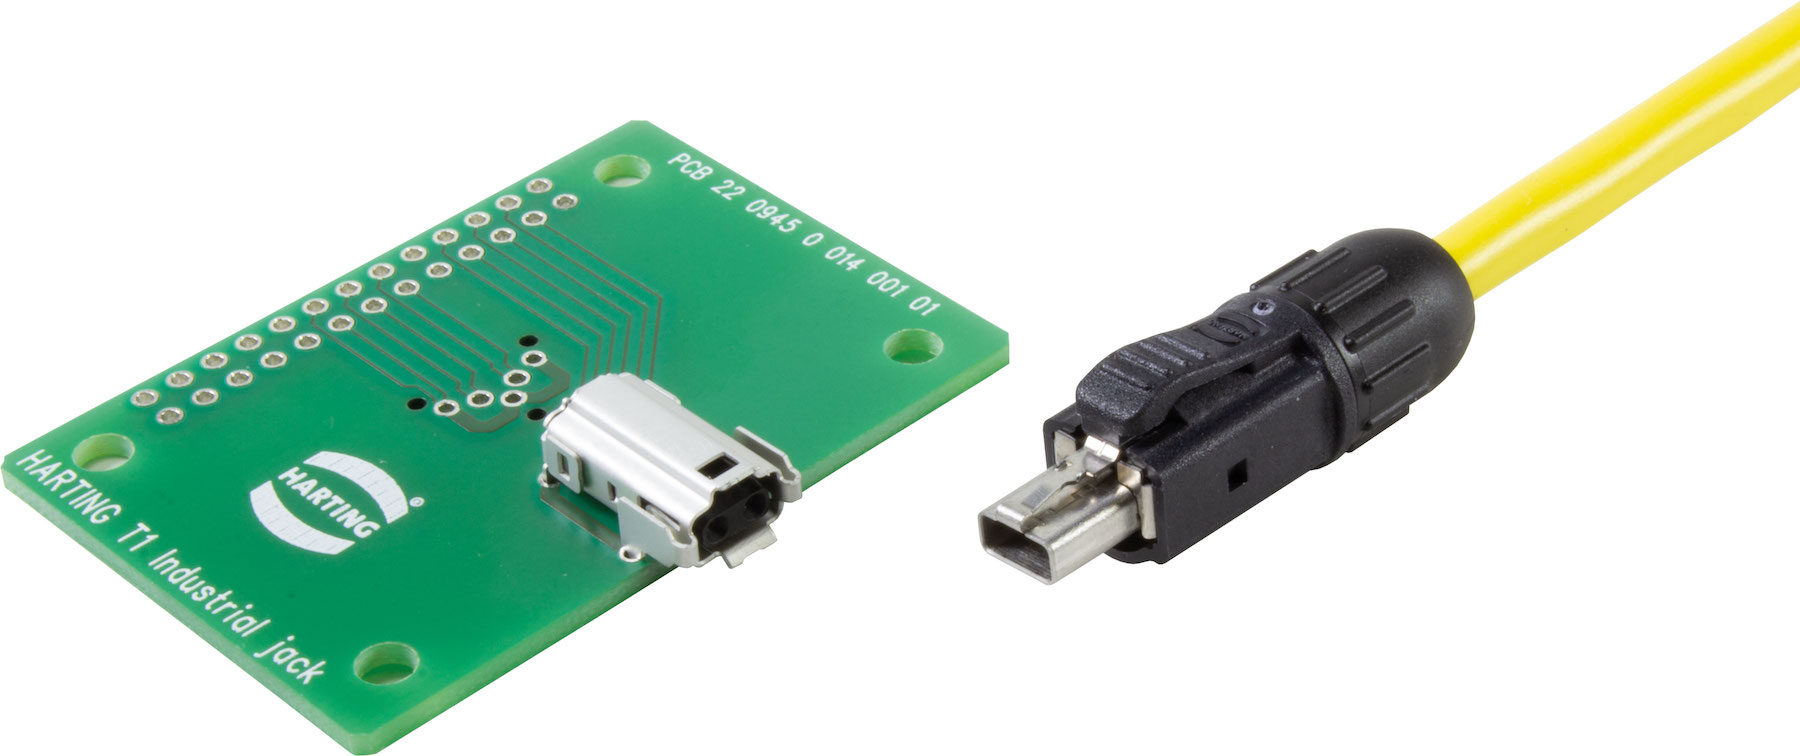 HARTING Ethernet connectors for industrial